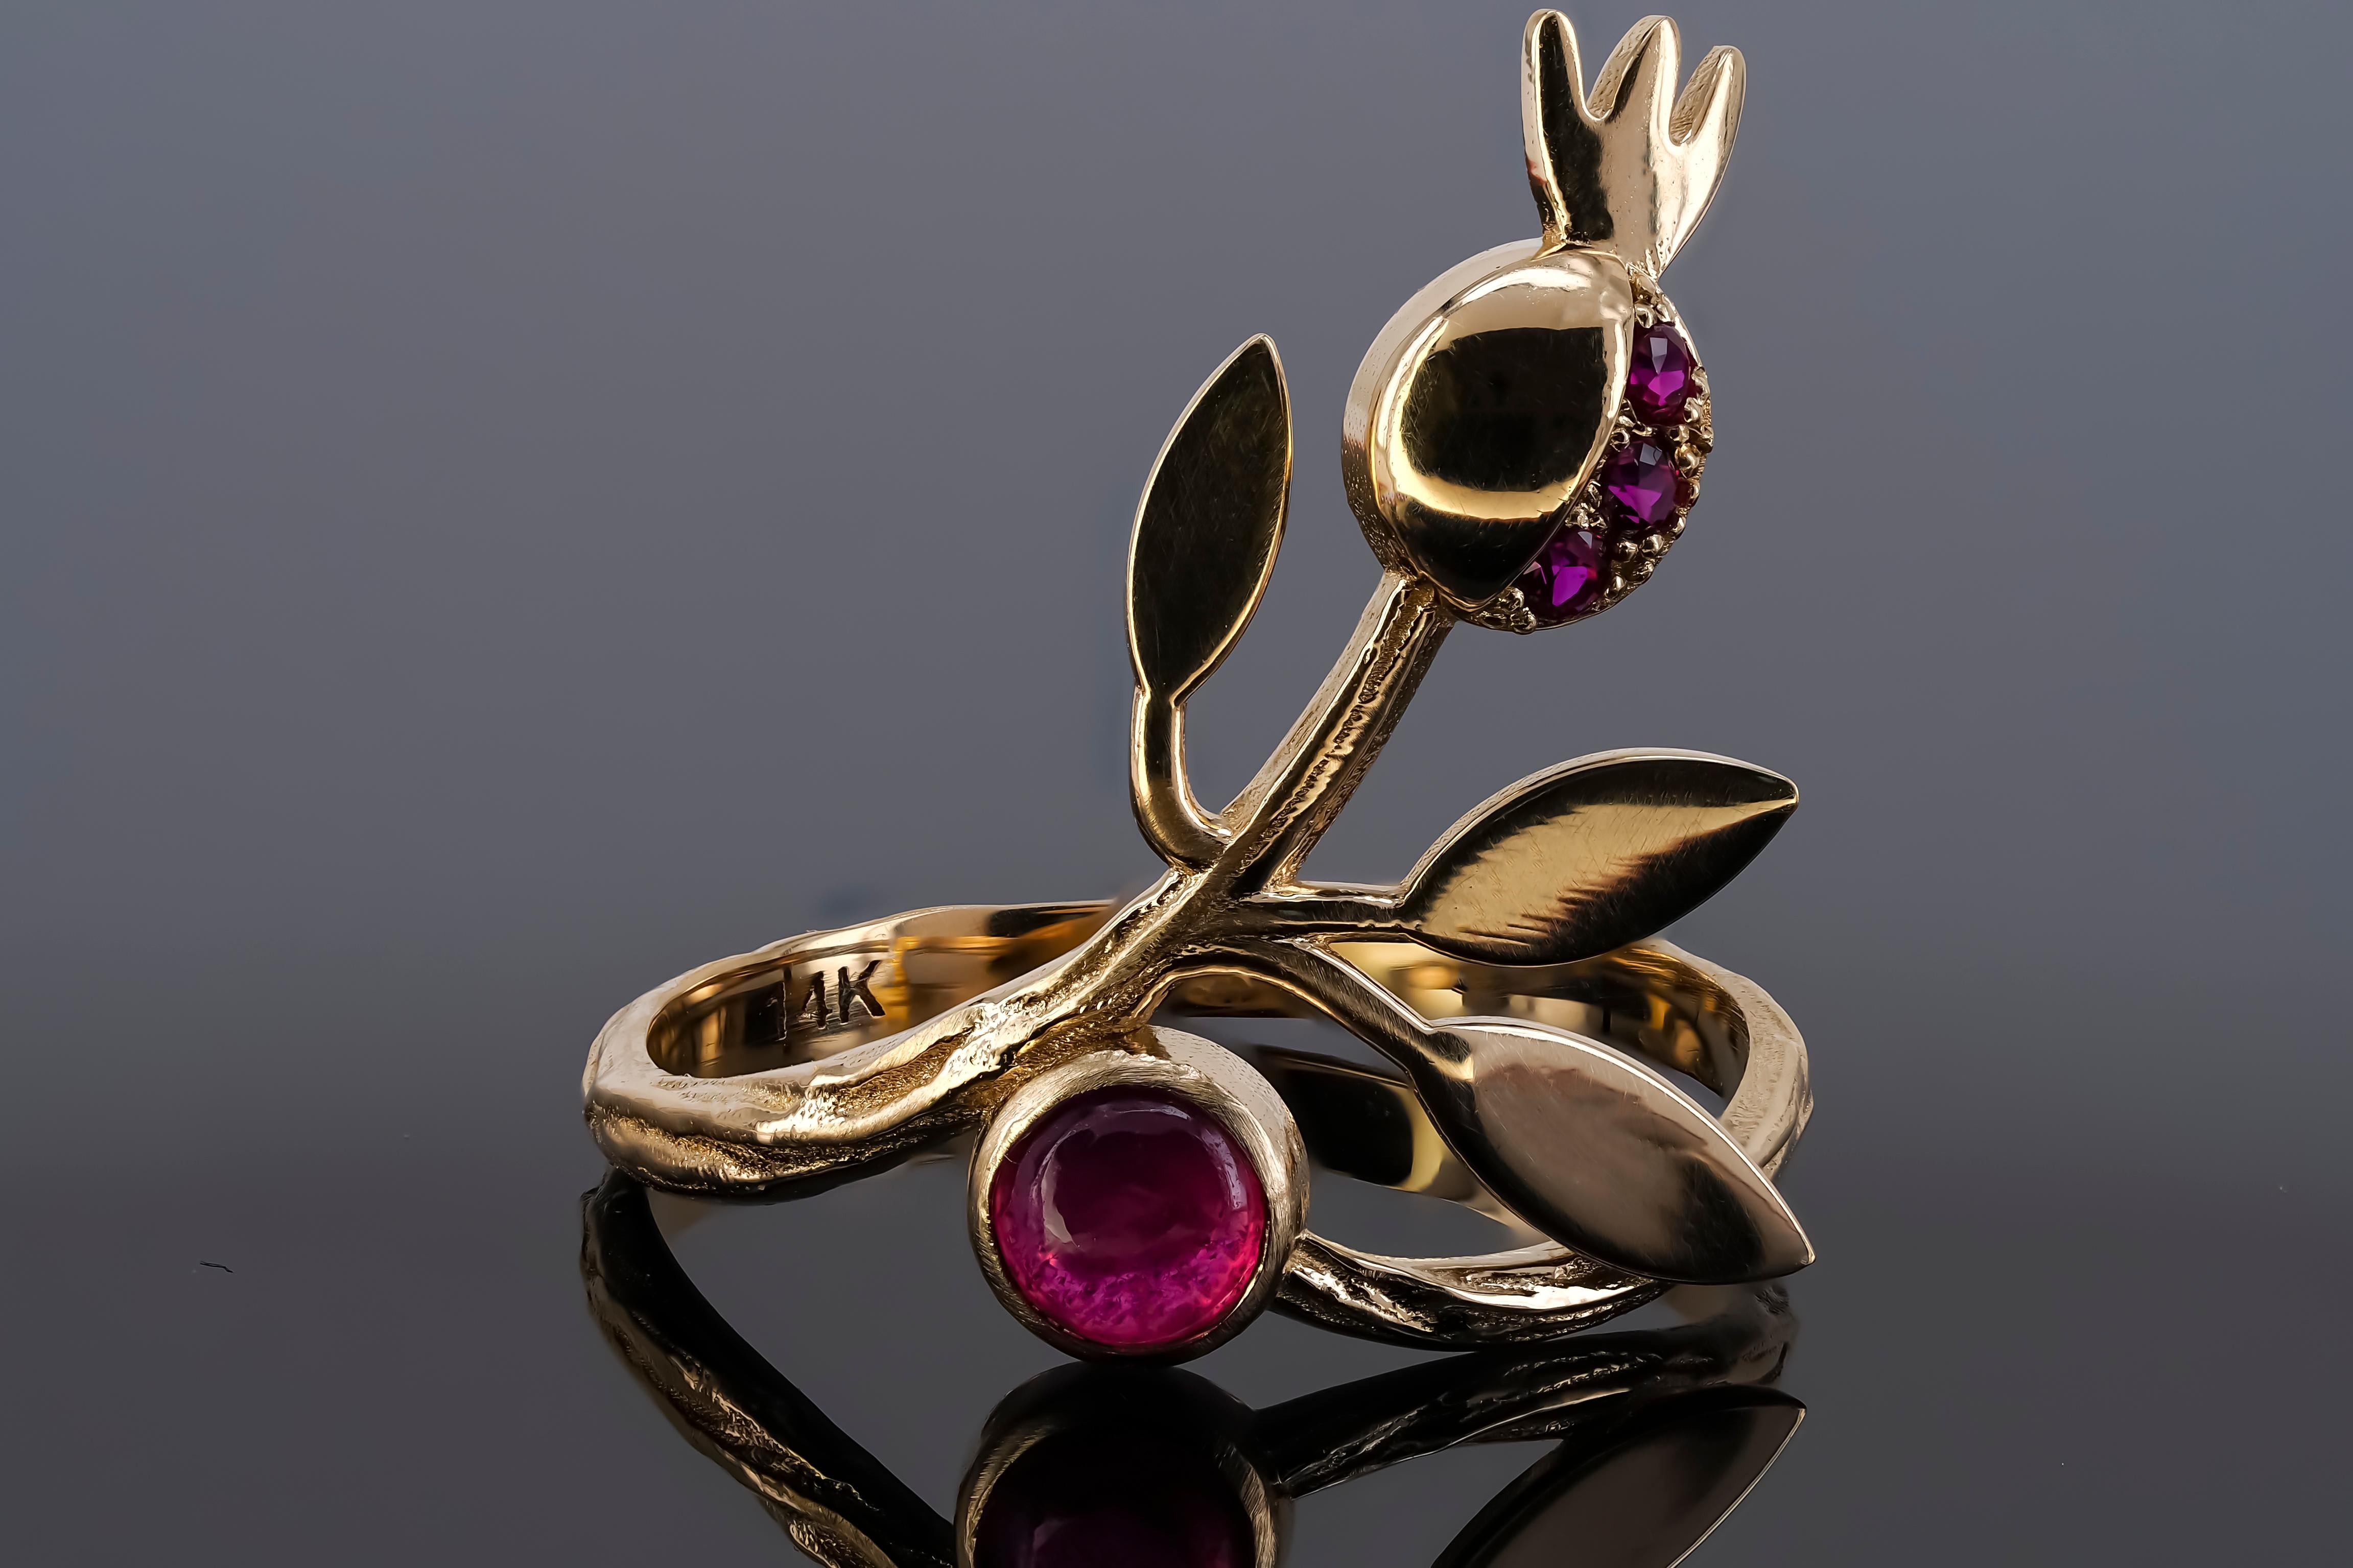 For Sale:  14 karat Gold Ring with Ruby, Sapphires. Pomegranate ring. July birthstone ring! 18